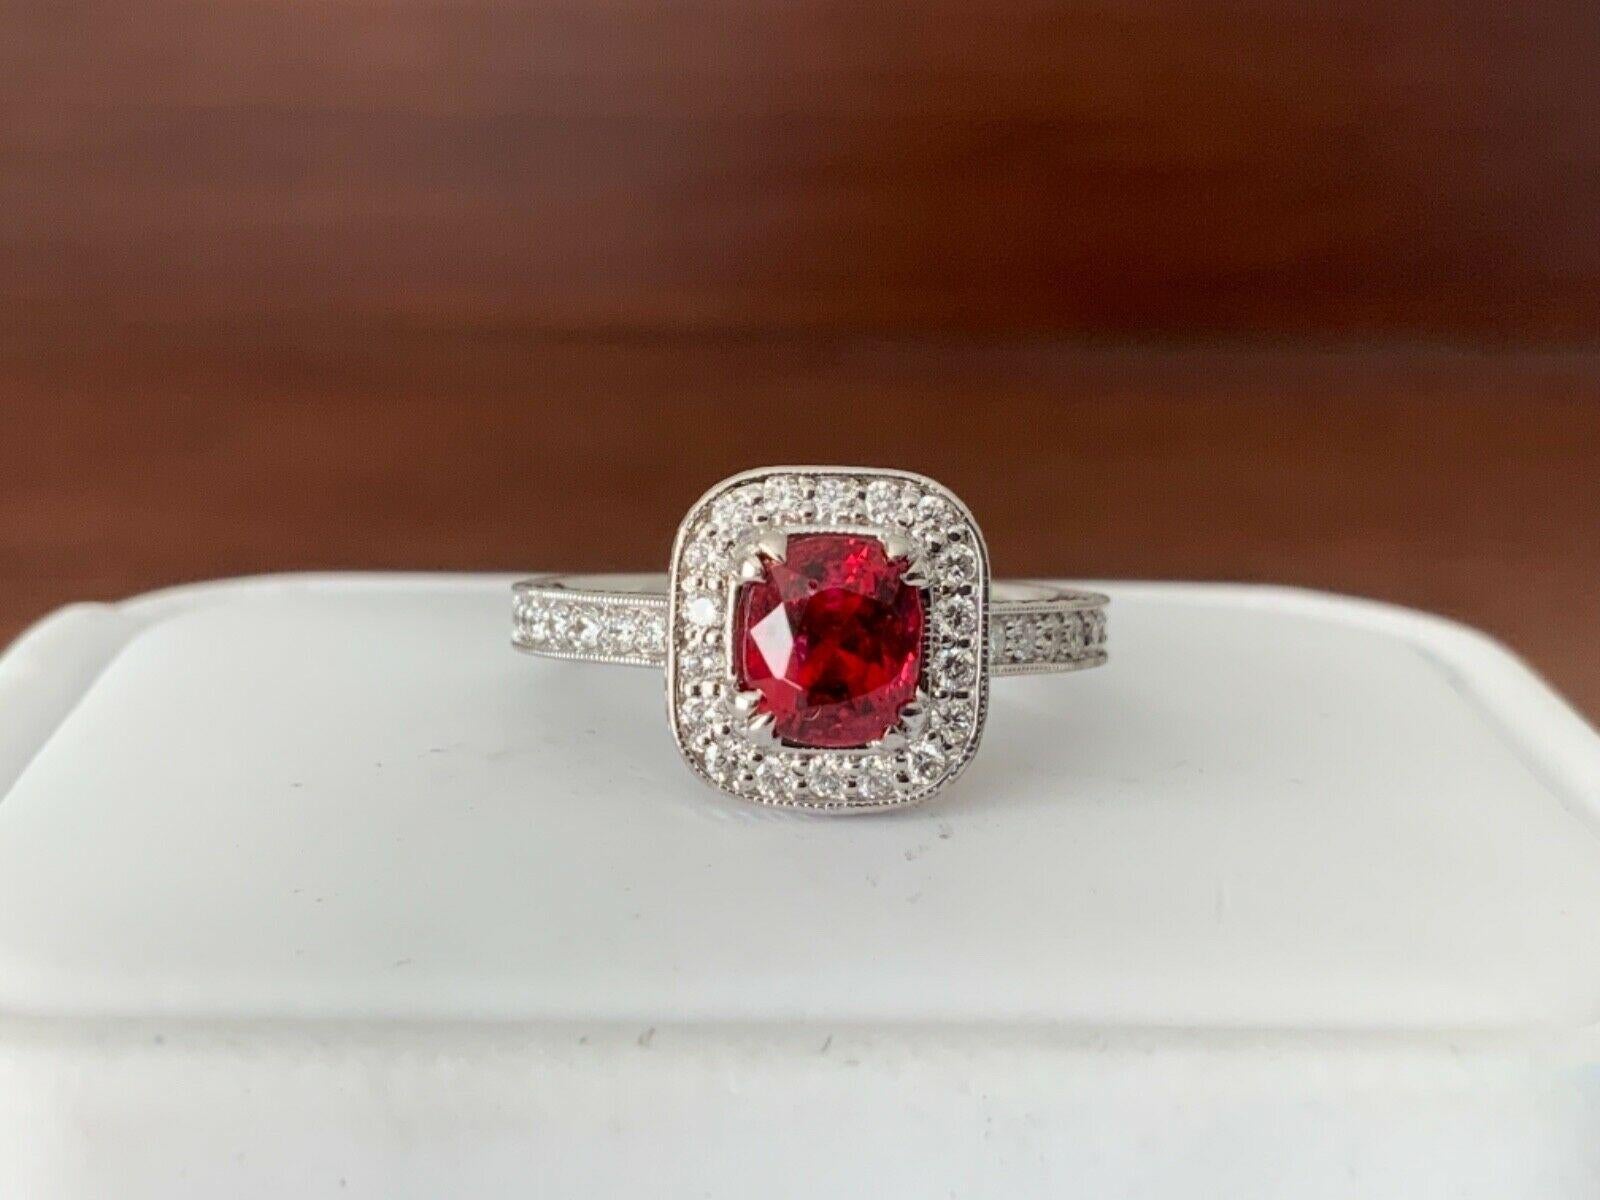 JUST IN TODAY!

If you are looking for RARE, RARE, RARE - and in investment grade, HEIRLOOM quality piece of jewelry that you hand down from generation to generation - you found it!

PRESENTED TODAY IS A NATURAL, NO HEAT .98 ct BURMA VIVID RED